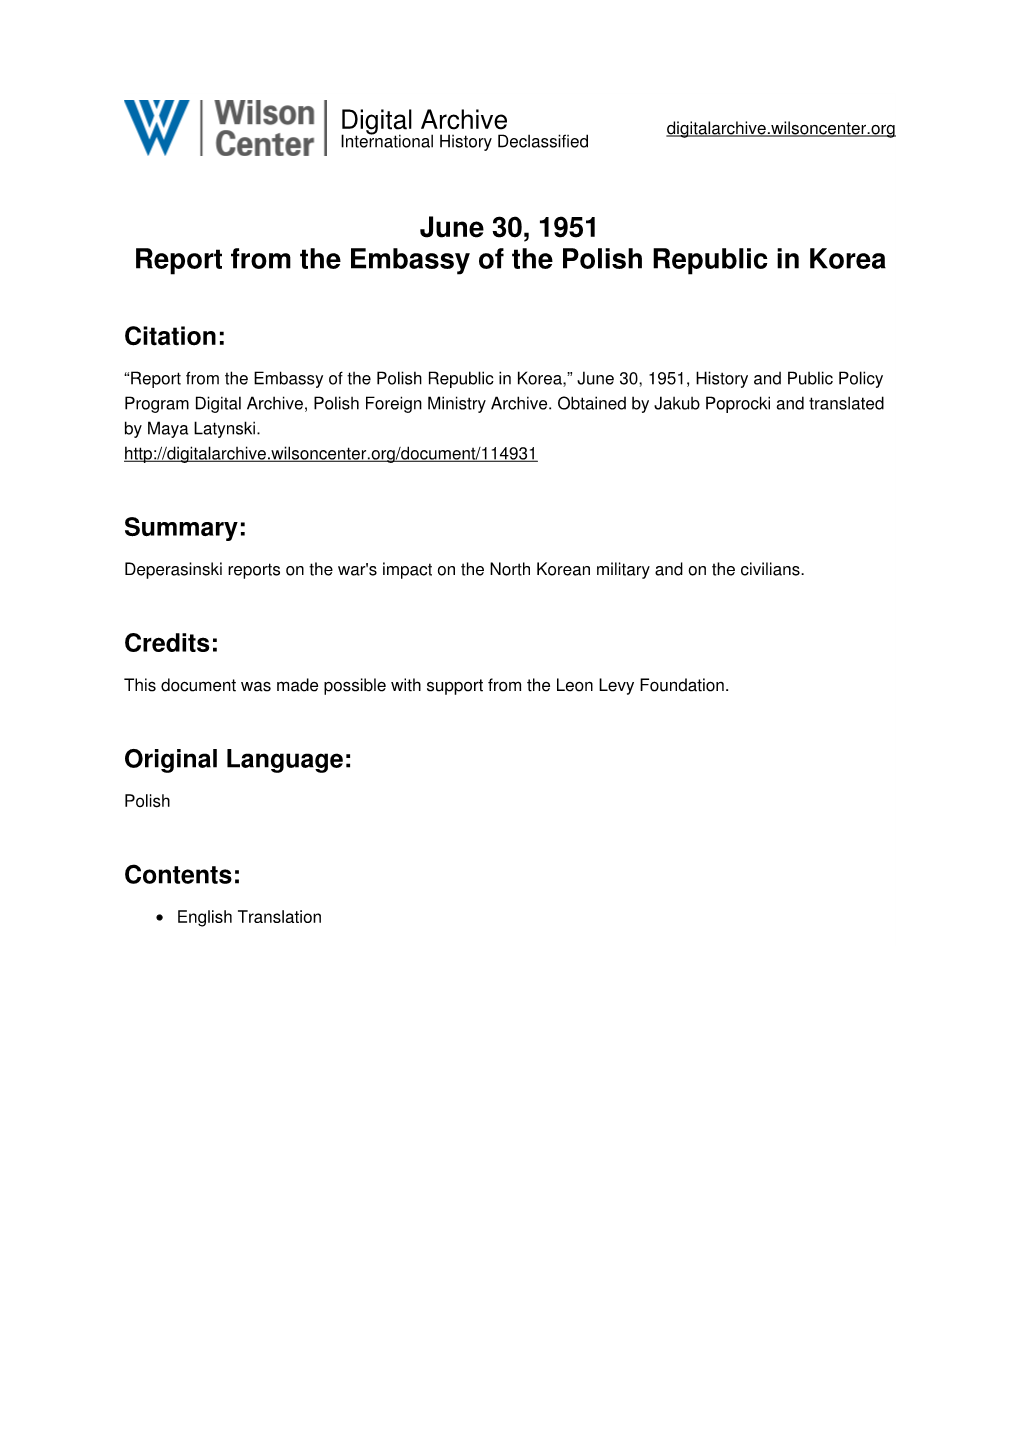 June 30, 1951 Report from the Embassy of the Polish Republic in Korea